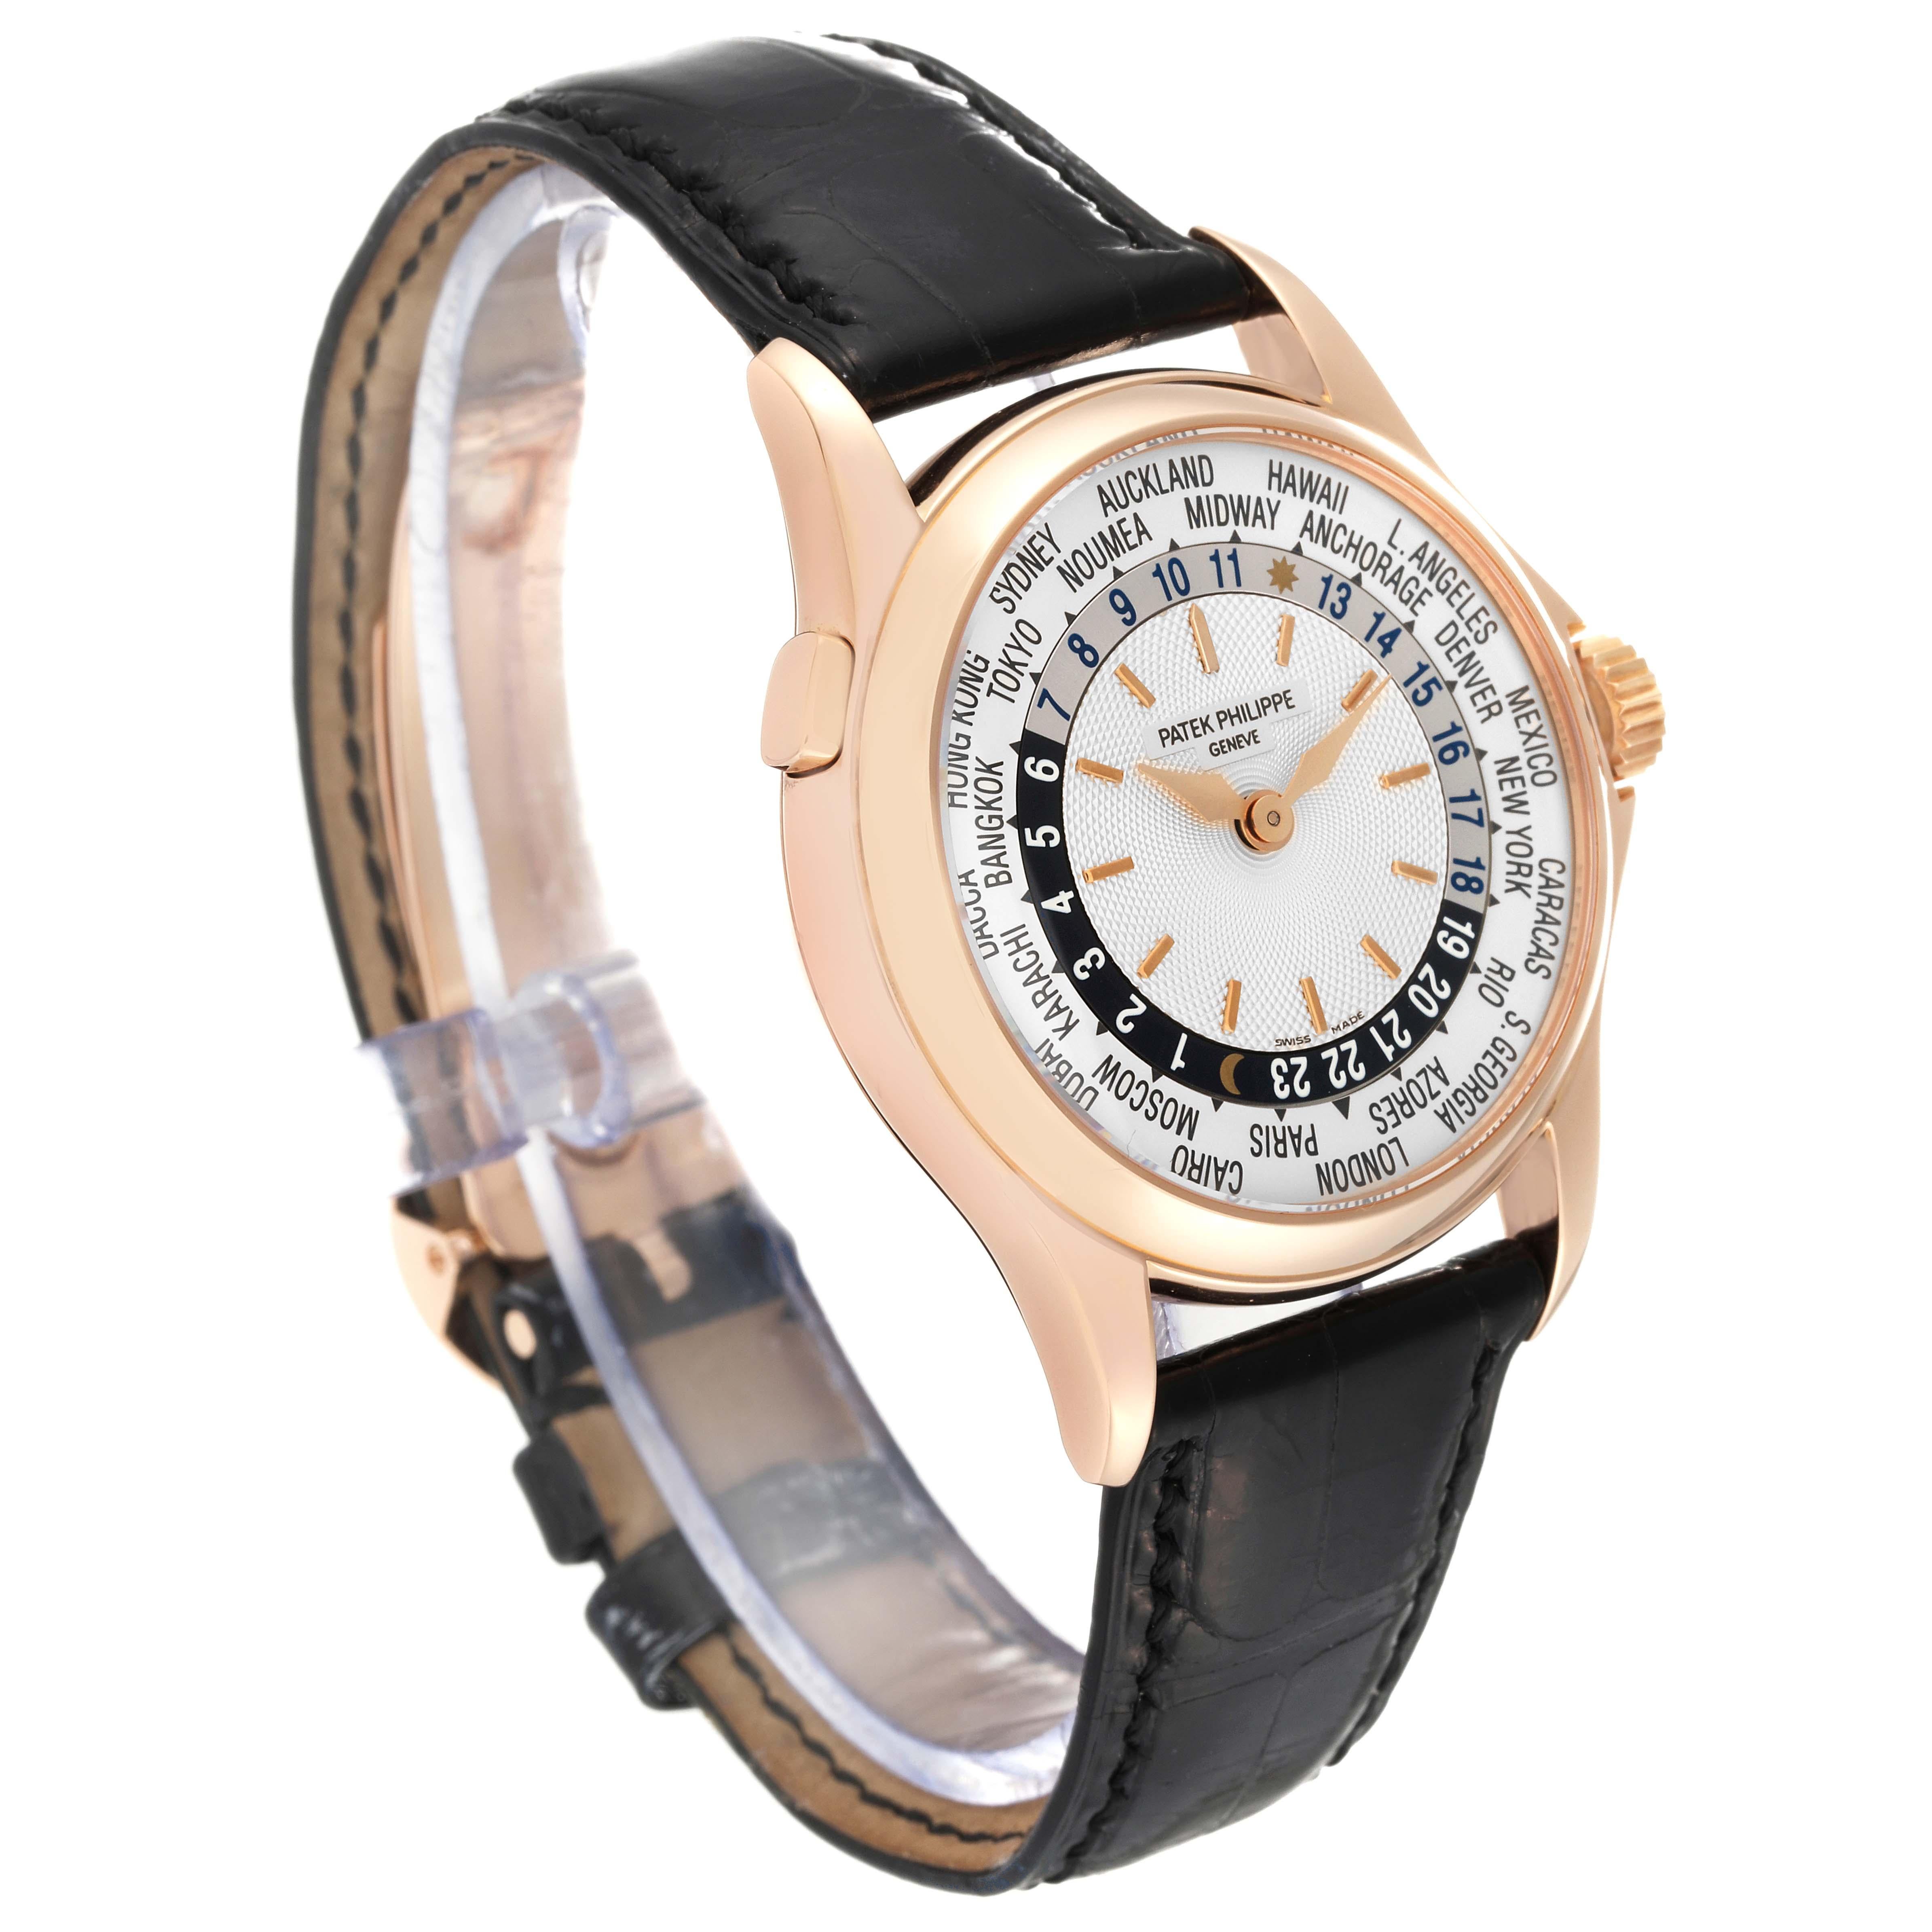 Patek Philippe World Time Automatic Silver Dial Rose Gold Mens Watch 5110 2